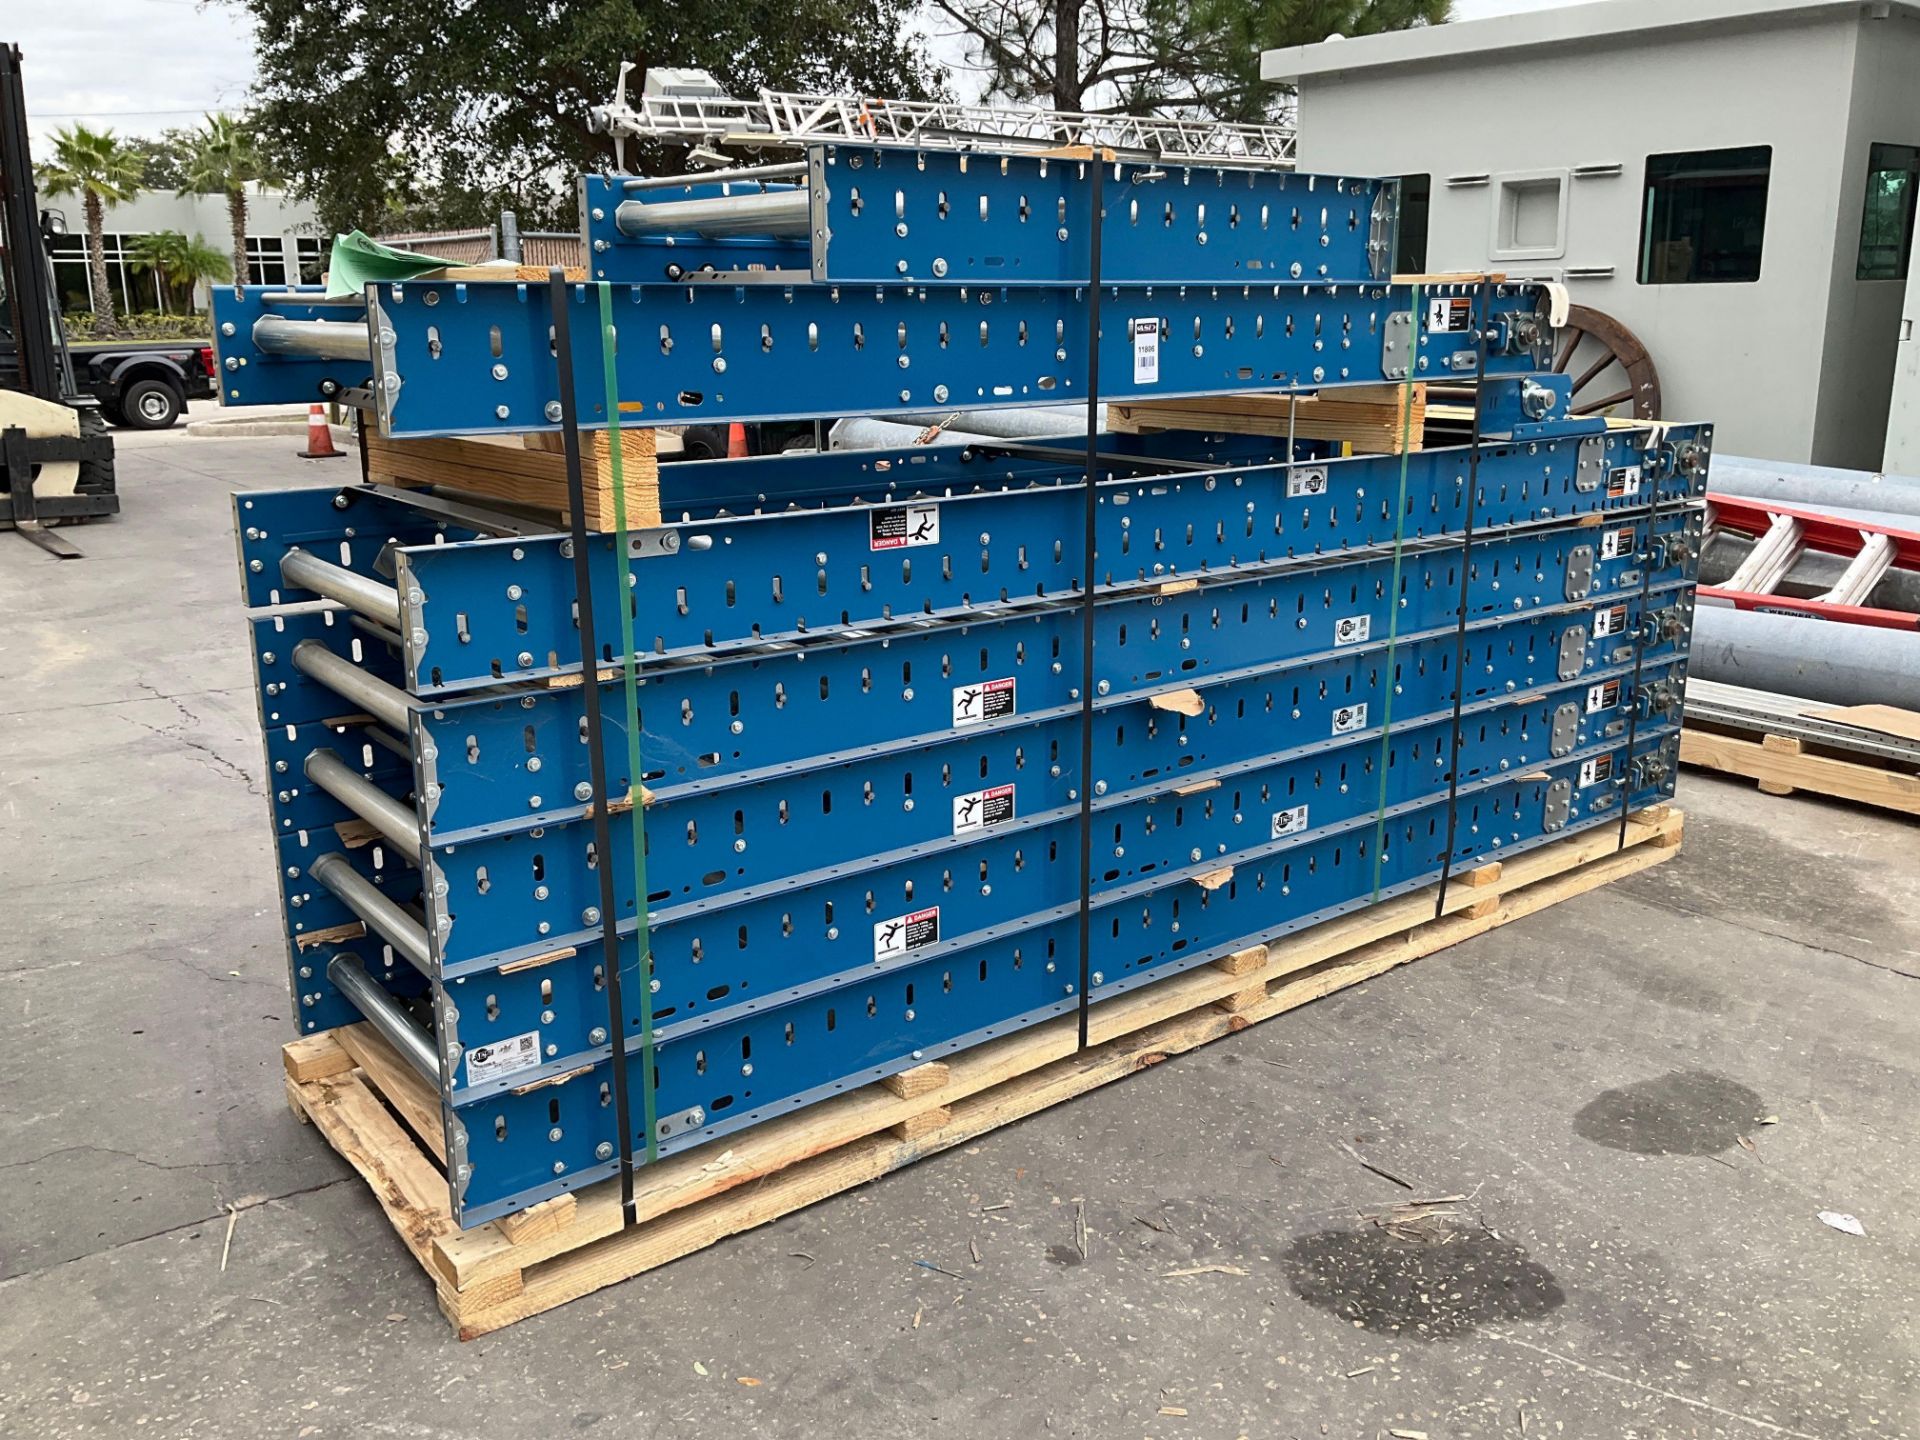 UNUSED ACSI AUTOMATED CONVEYOR MODEL 190CAP, APPROX SIZES OF ITEM ON PALLET (5 ) 120" x 30" ( 1 ) 93